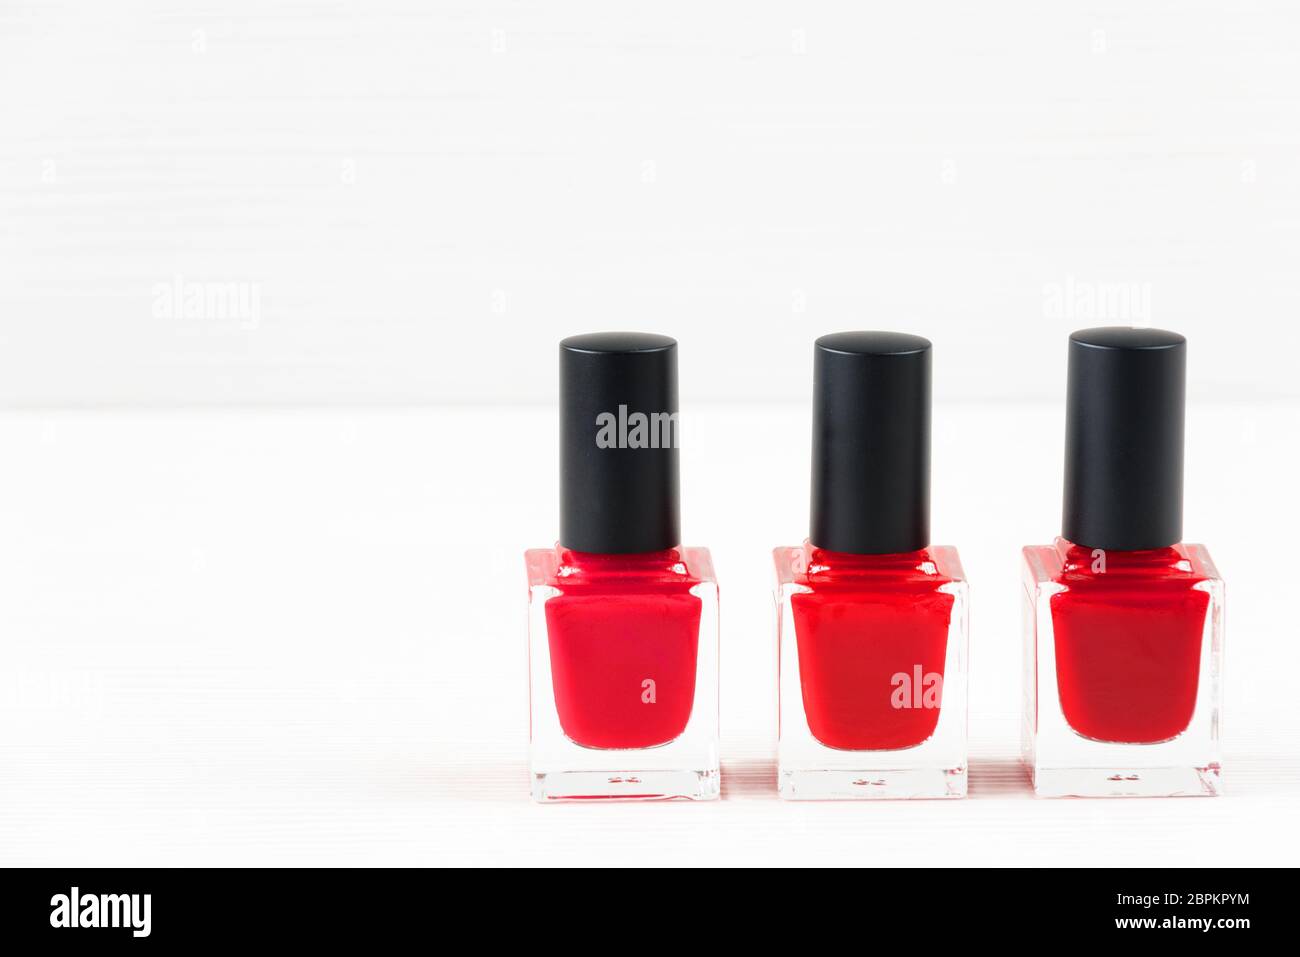 Close-up image of three Red nail polish bottles on white wooden background. Stock Photo